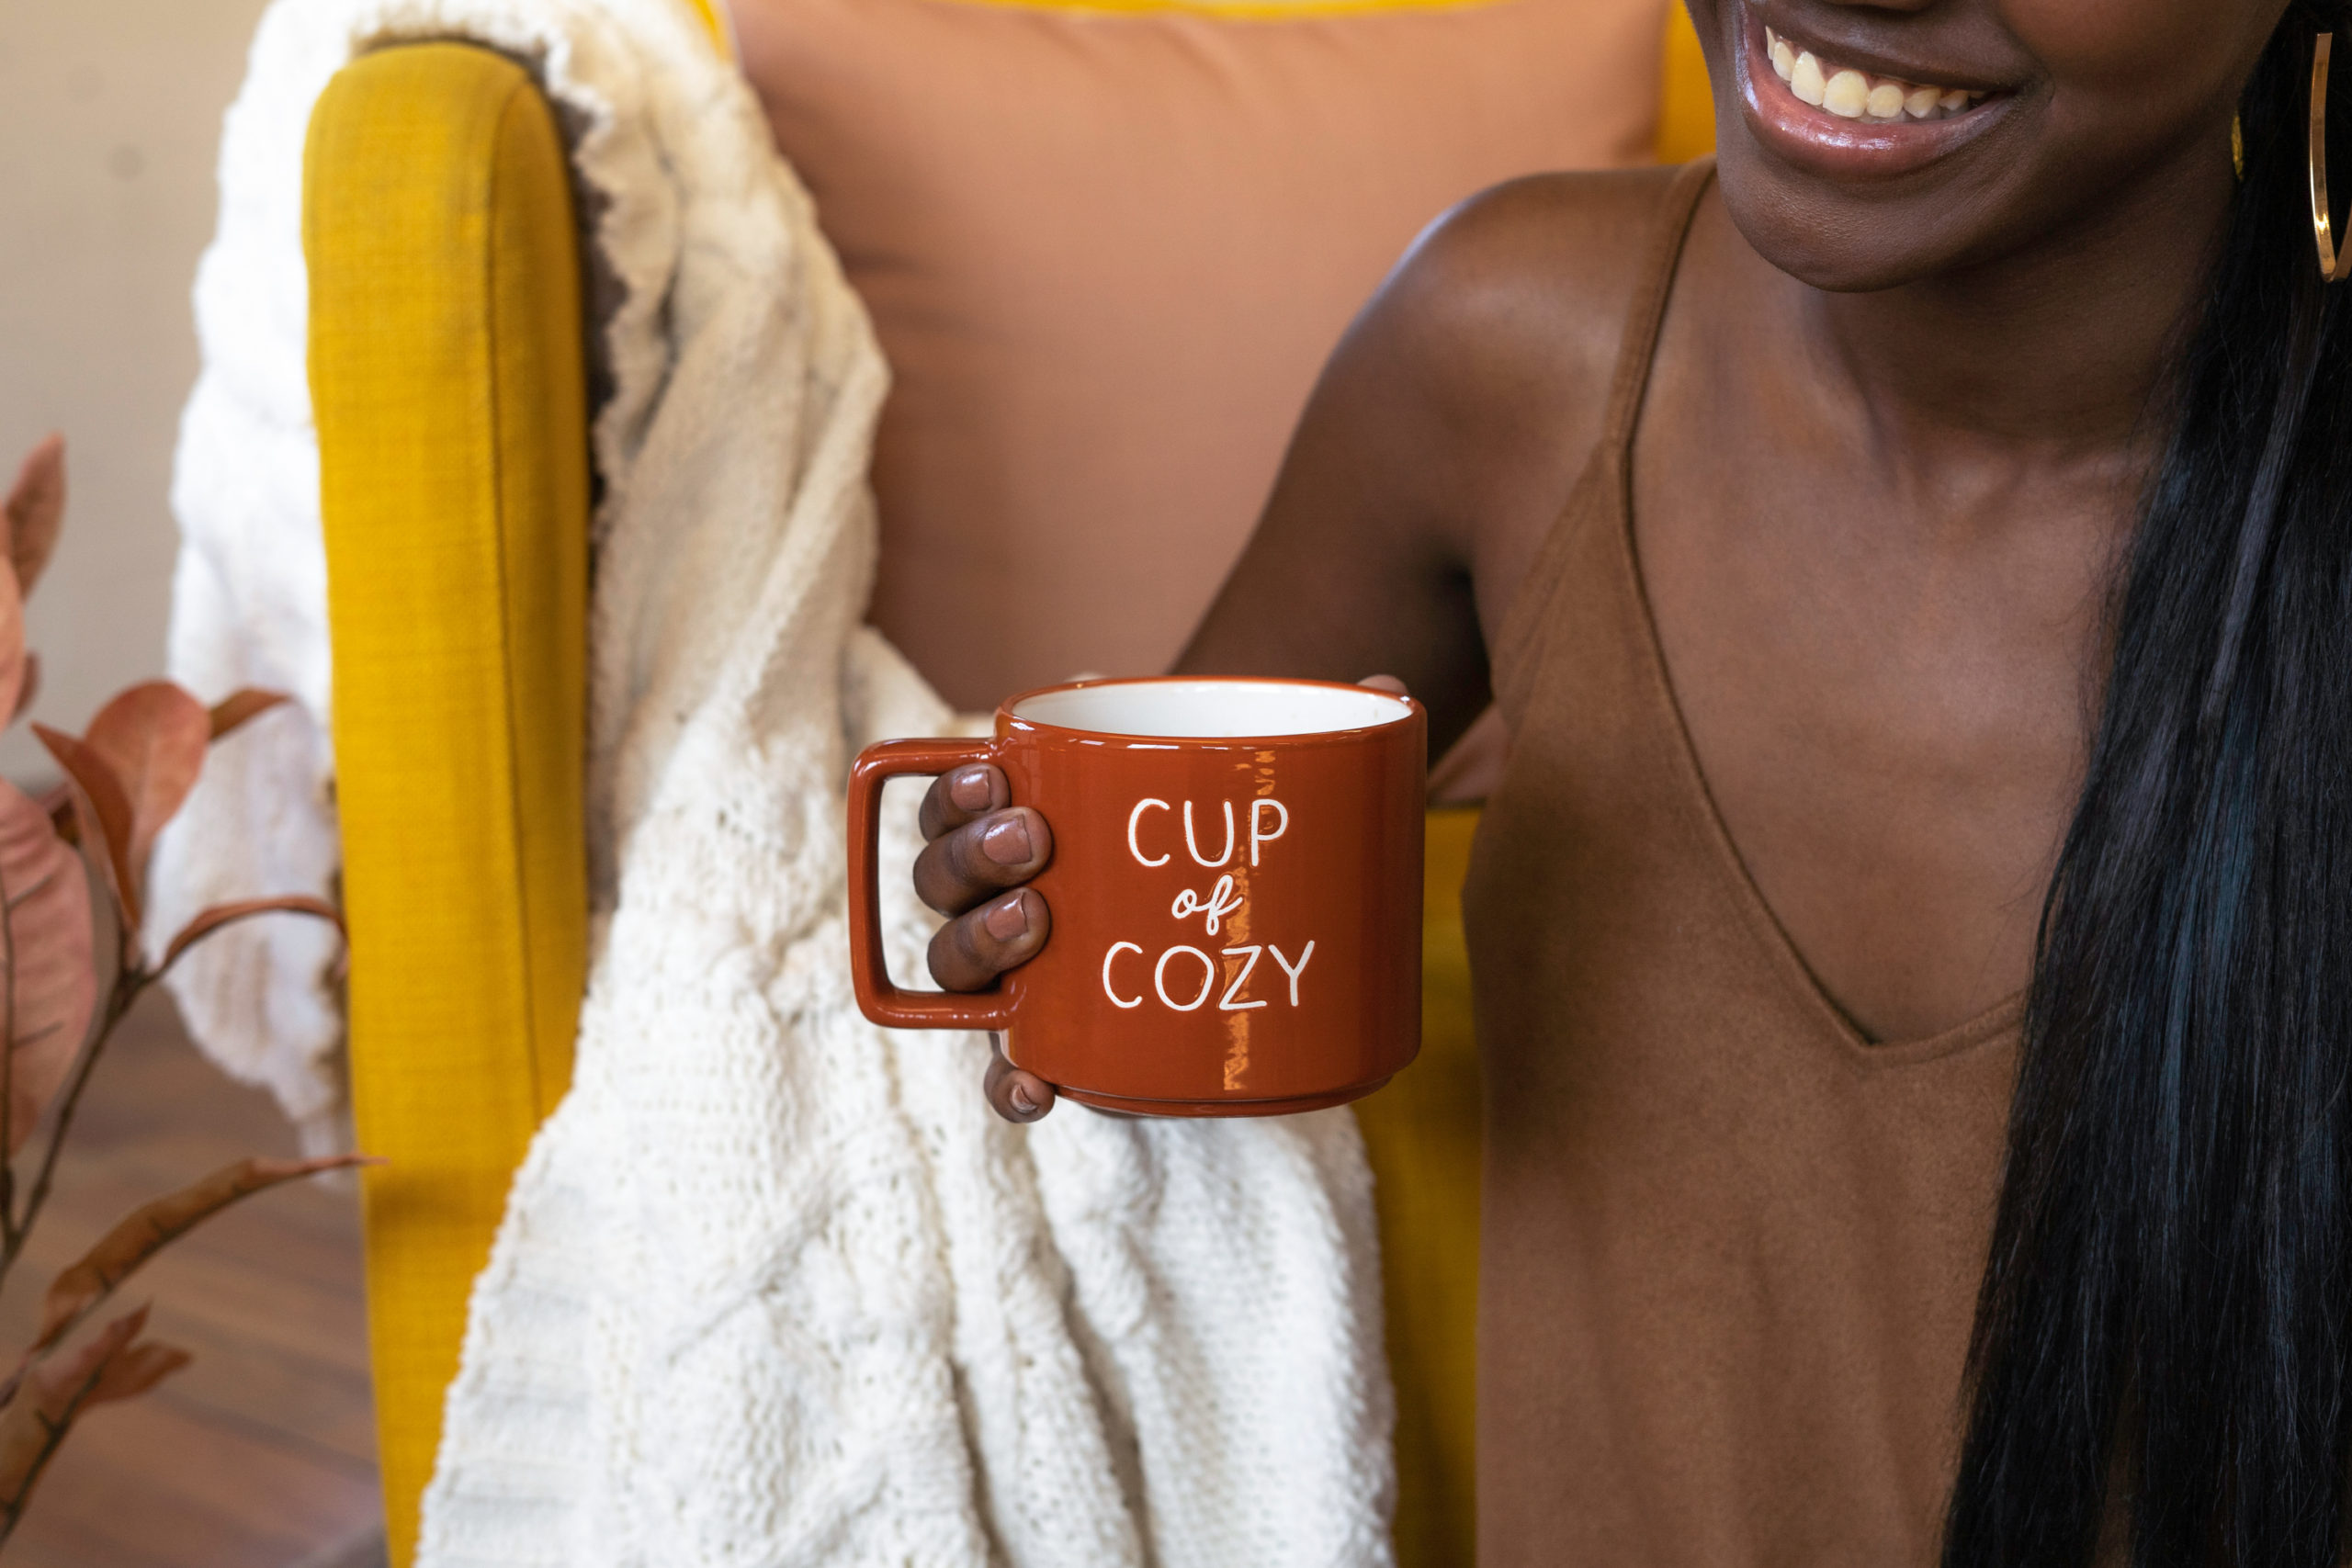 black-lady-holding-a-red-cup-of-coffee-with-cup-of-cozy-written-on-it